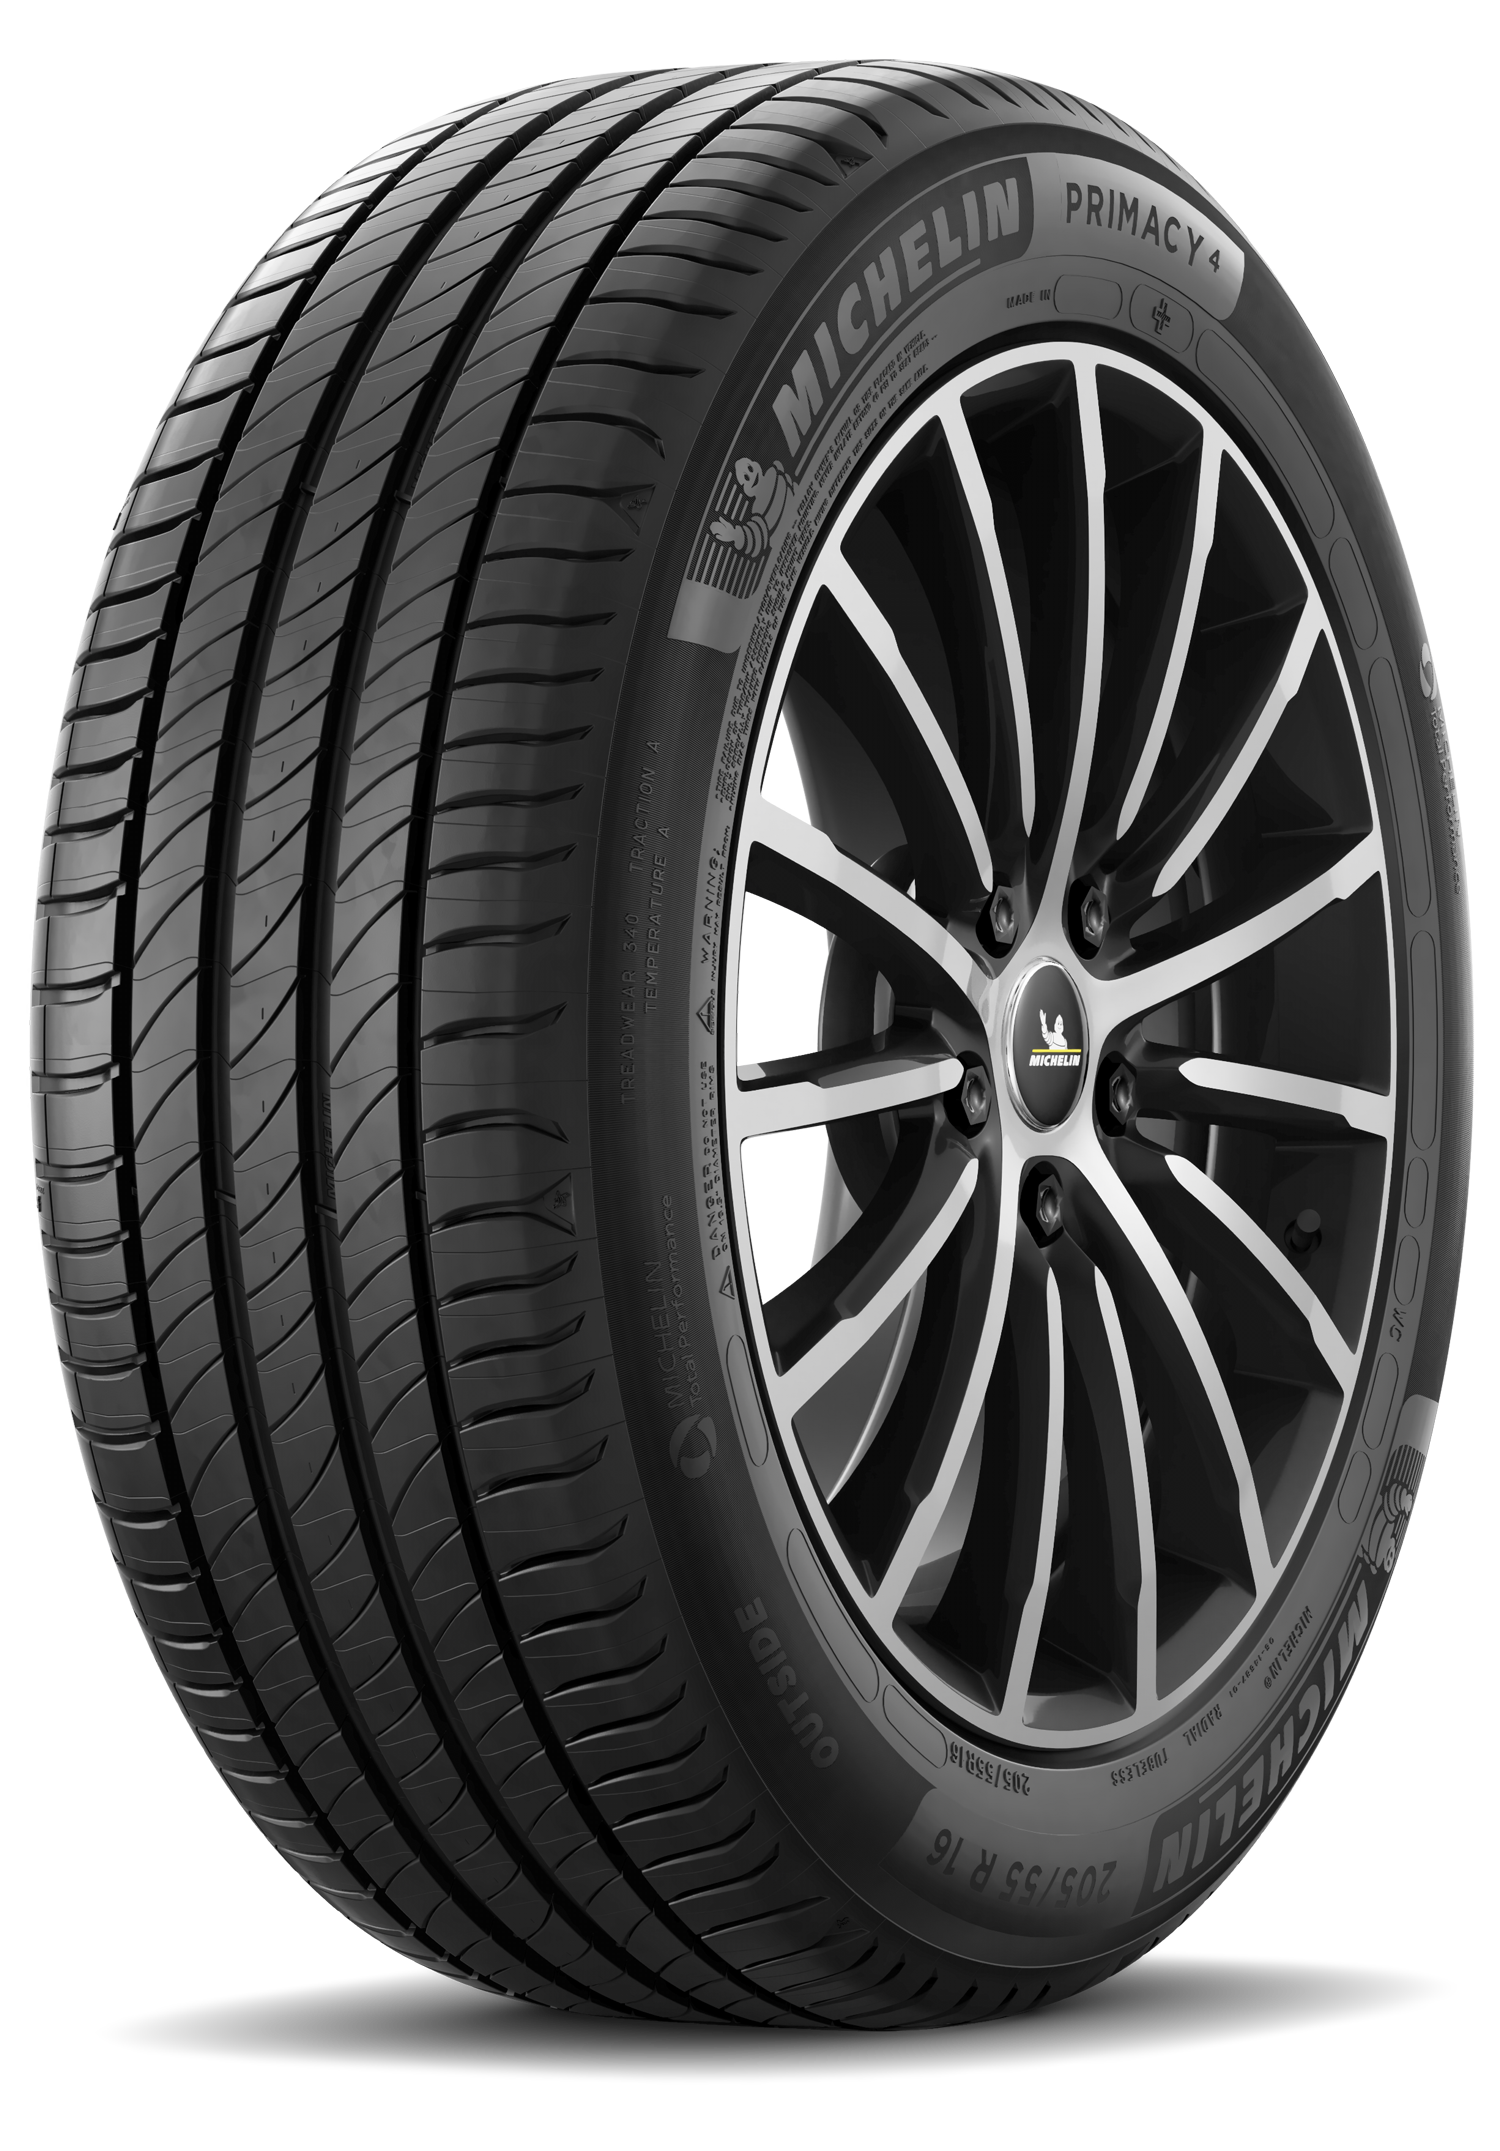 Tests Plus Tyre Reviews and Michelin 4 - Primacy